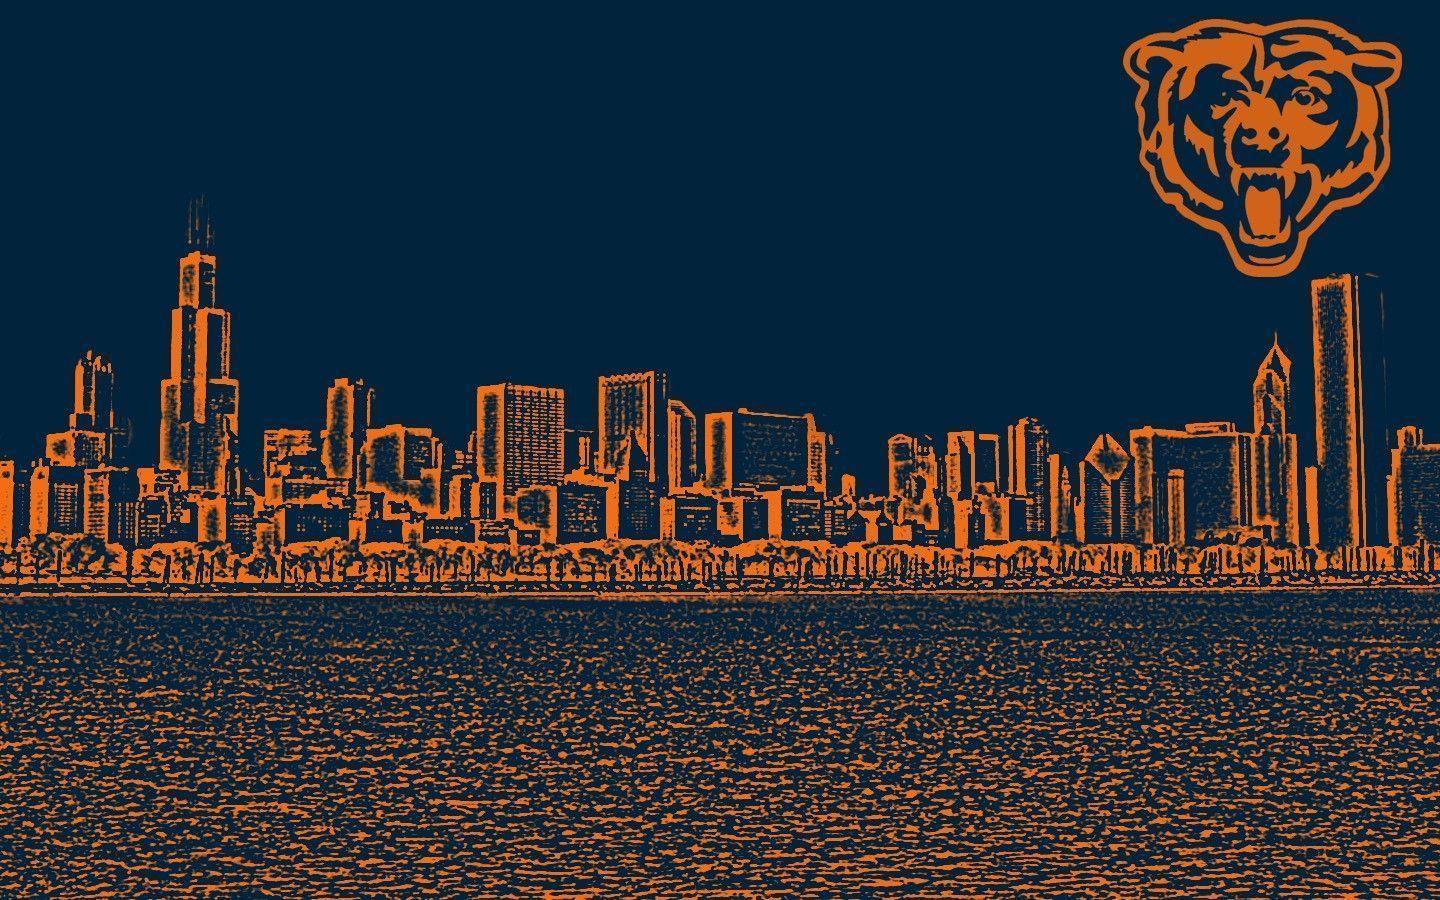 Chicago Bears Wallpaper HD Is Available For Download In Following